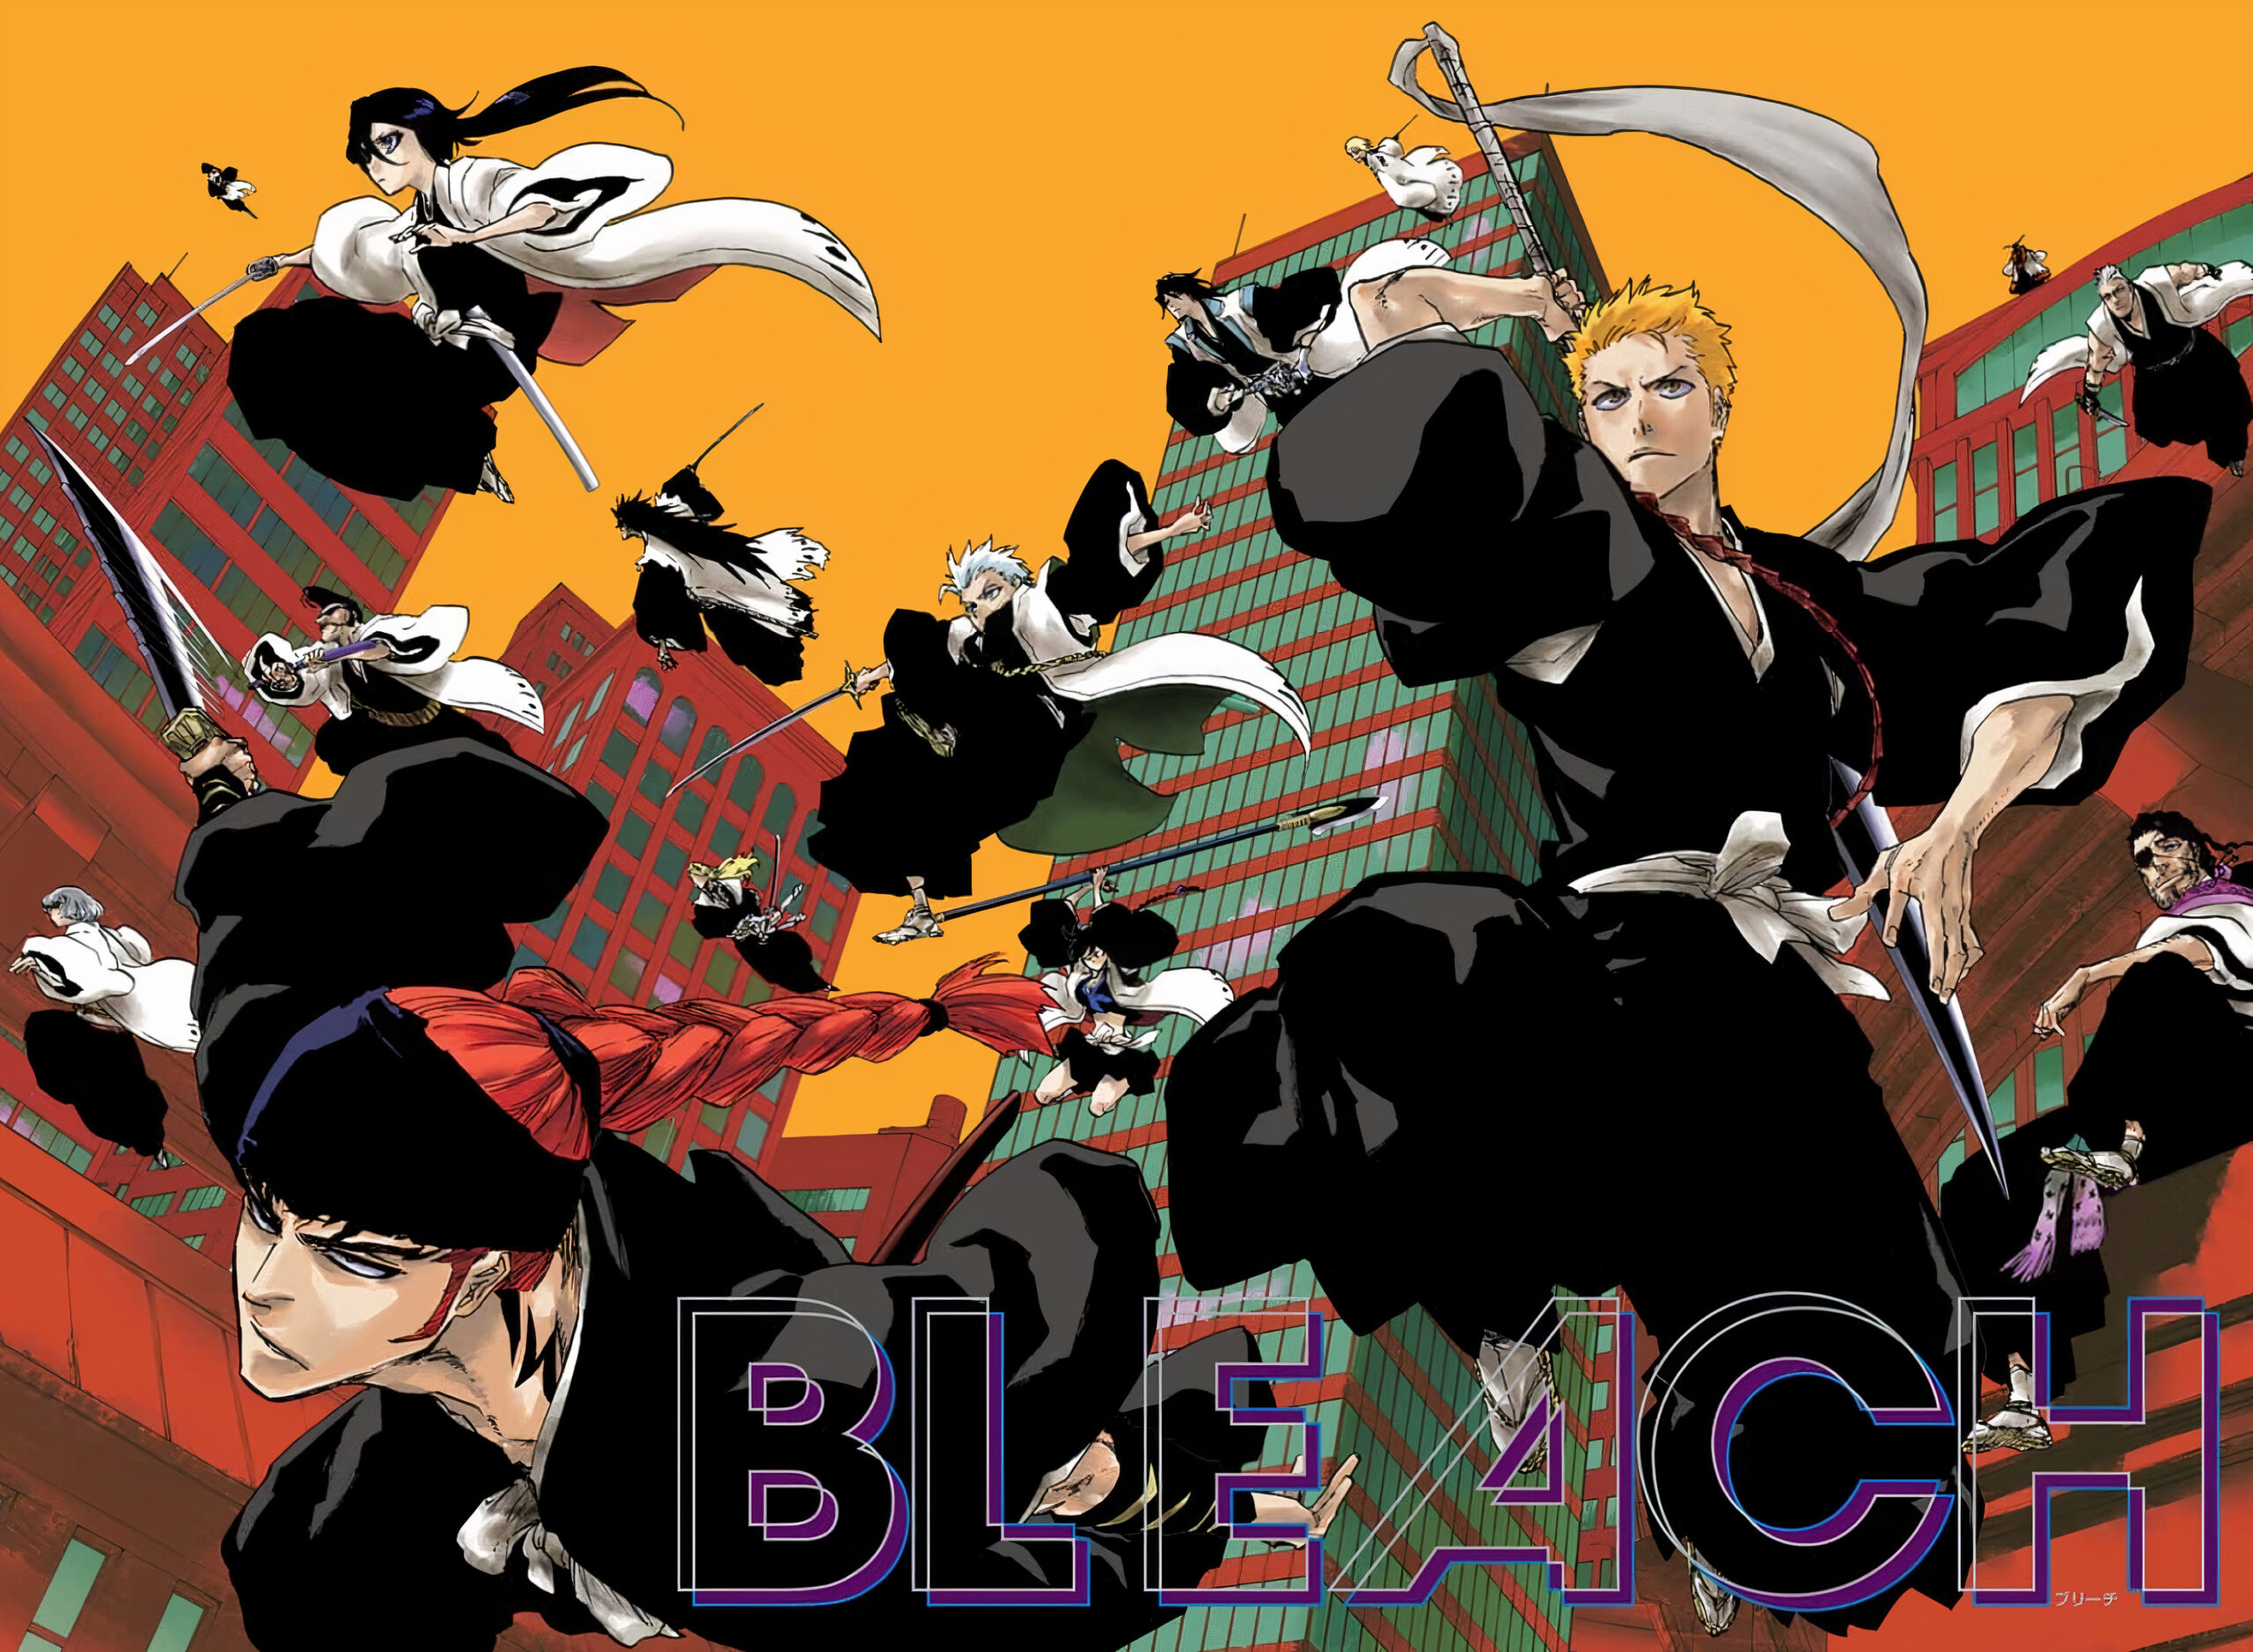 Bleach: Thousand-Year Blood War Anime Sees Red in New Key Visual